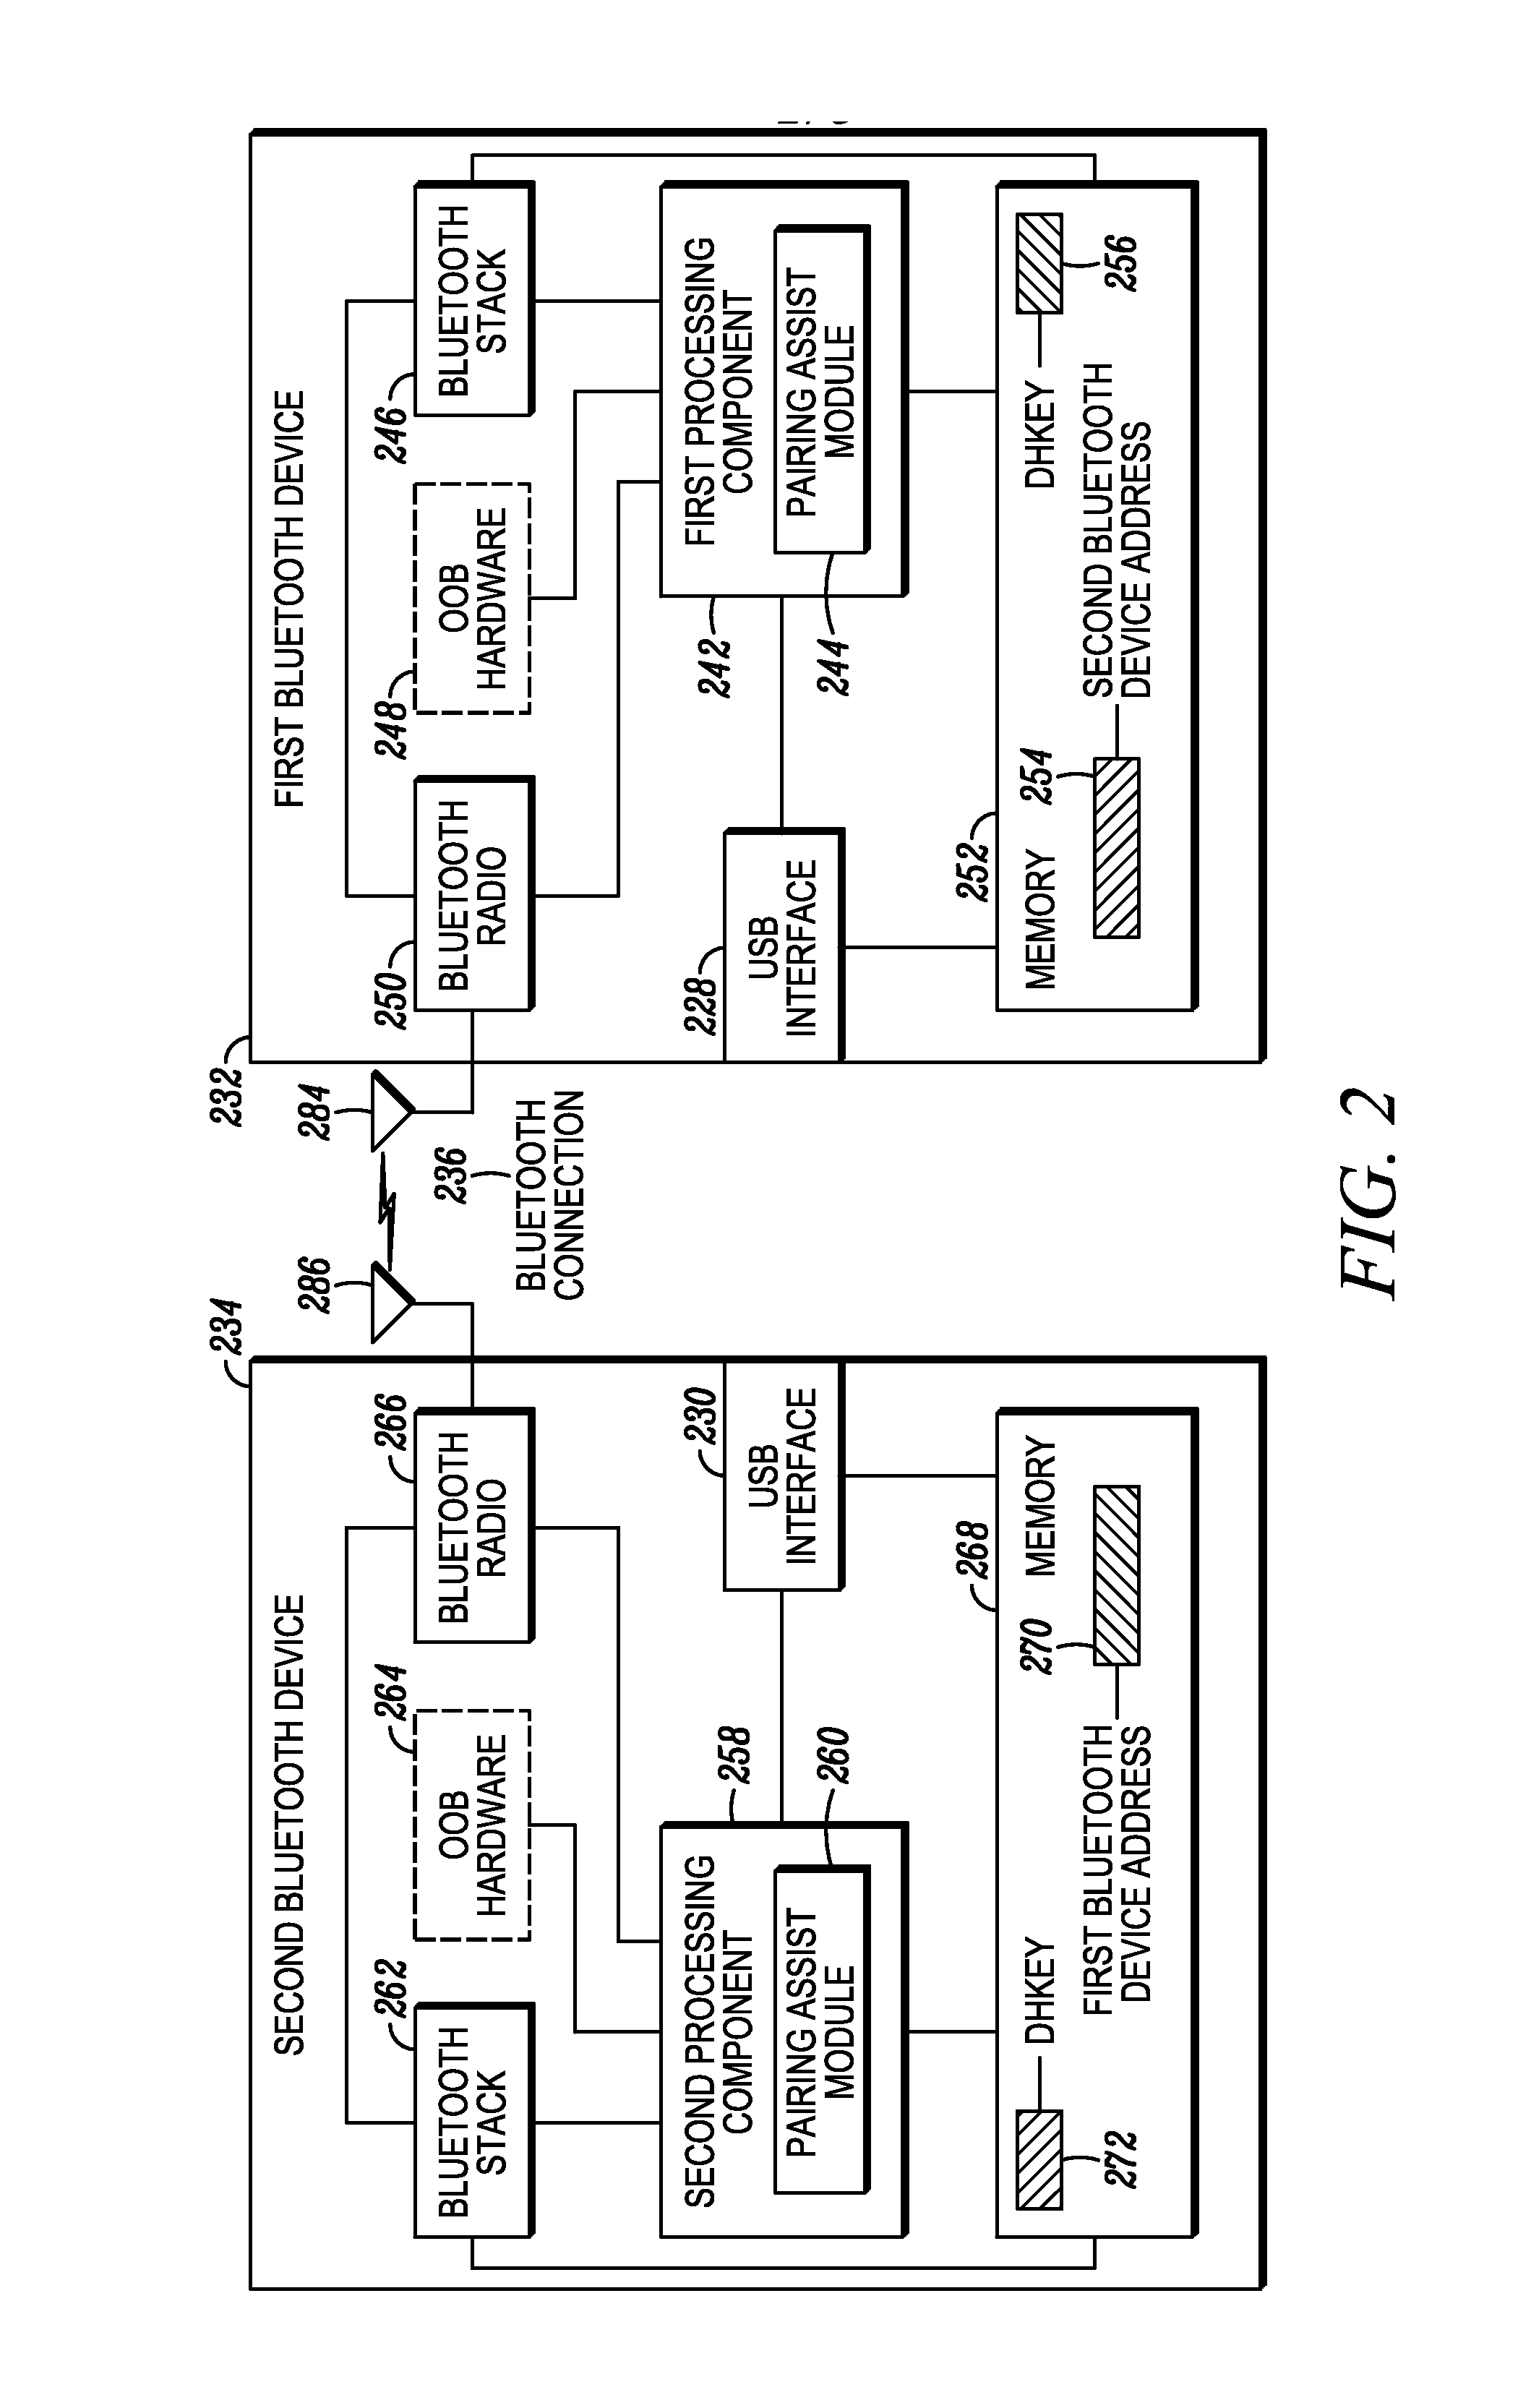 Method and Apparatus to Facilitate Pairing Between Wireless Devices